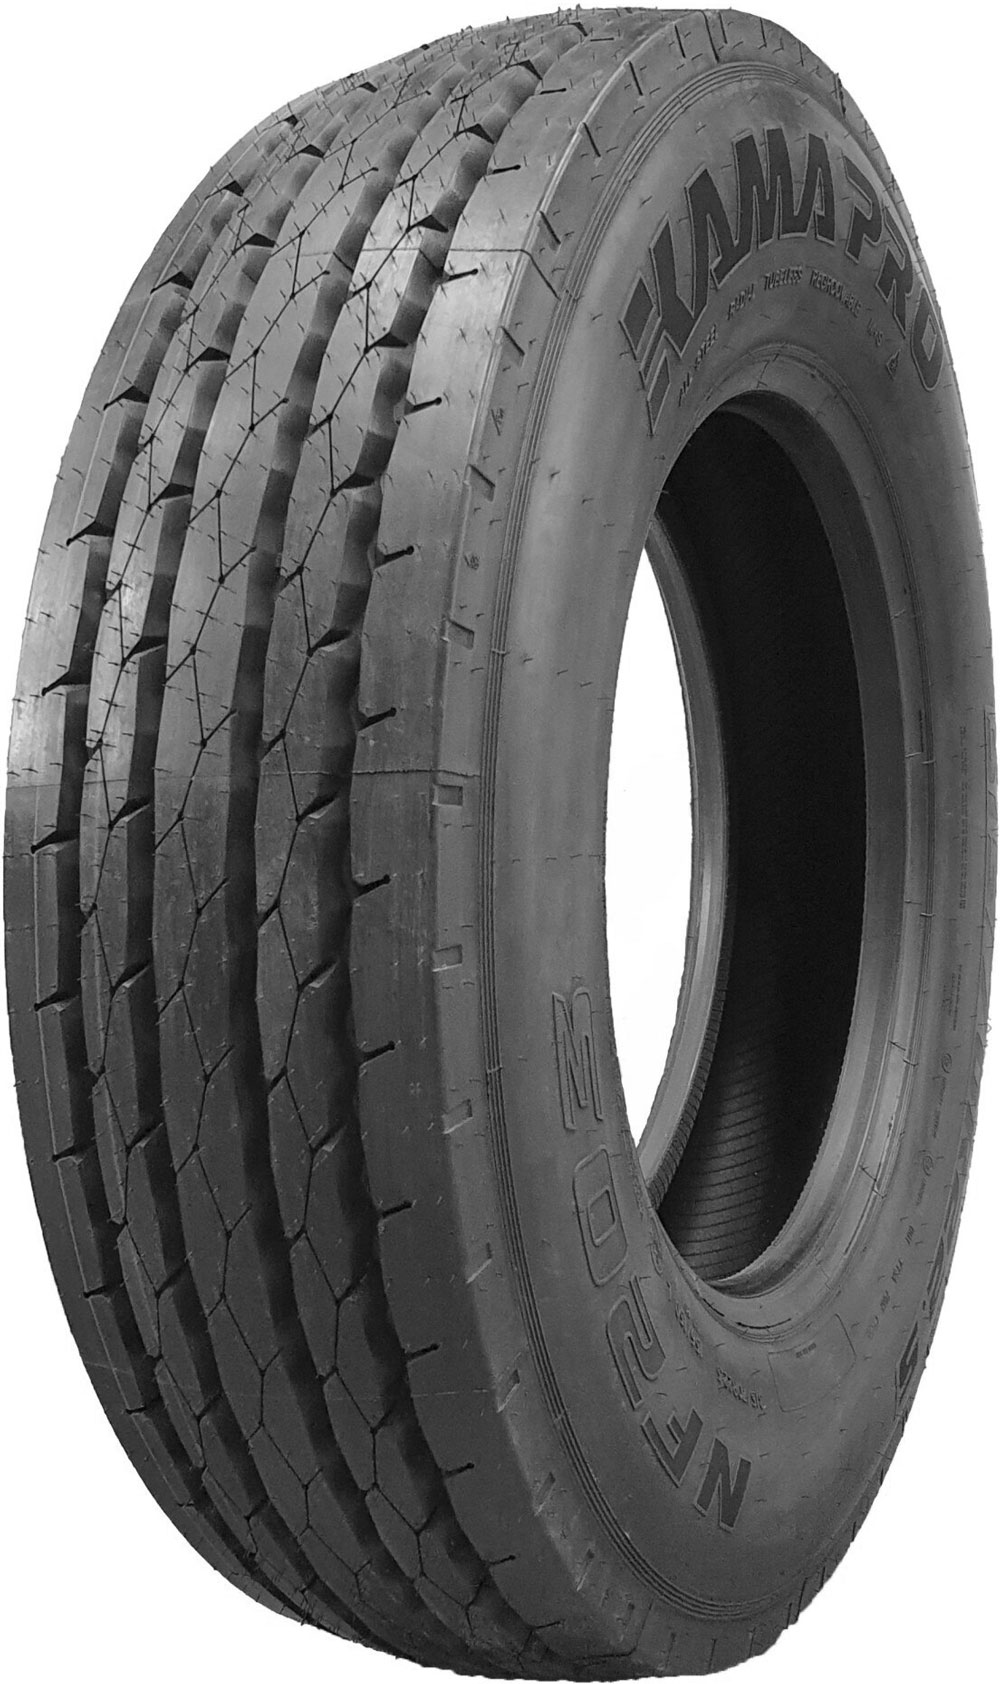 product_type-heavy_tires KAMA NF 203 385/55 R22.5 K